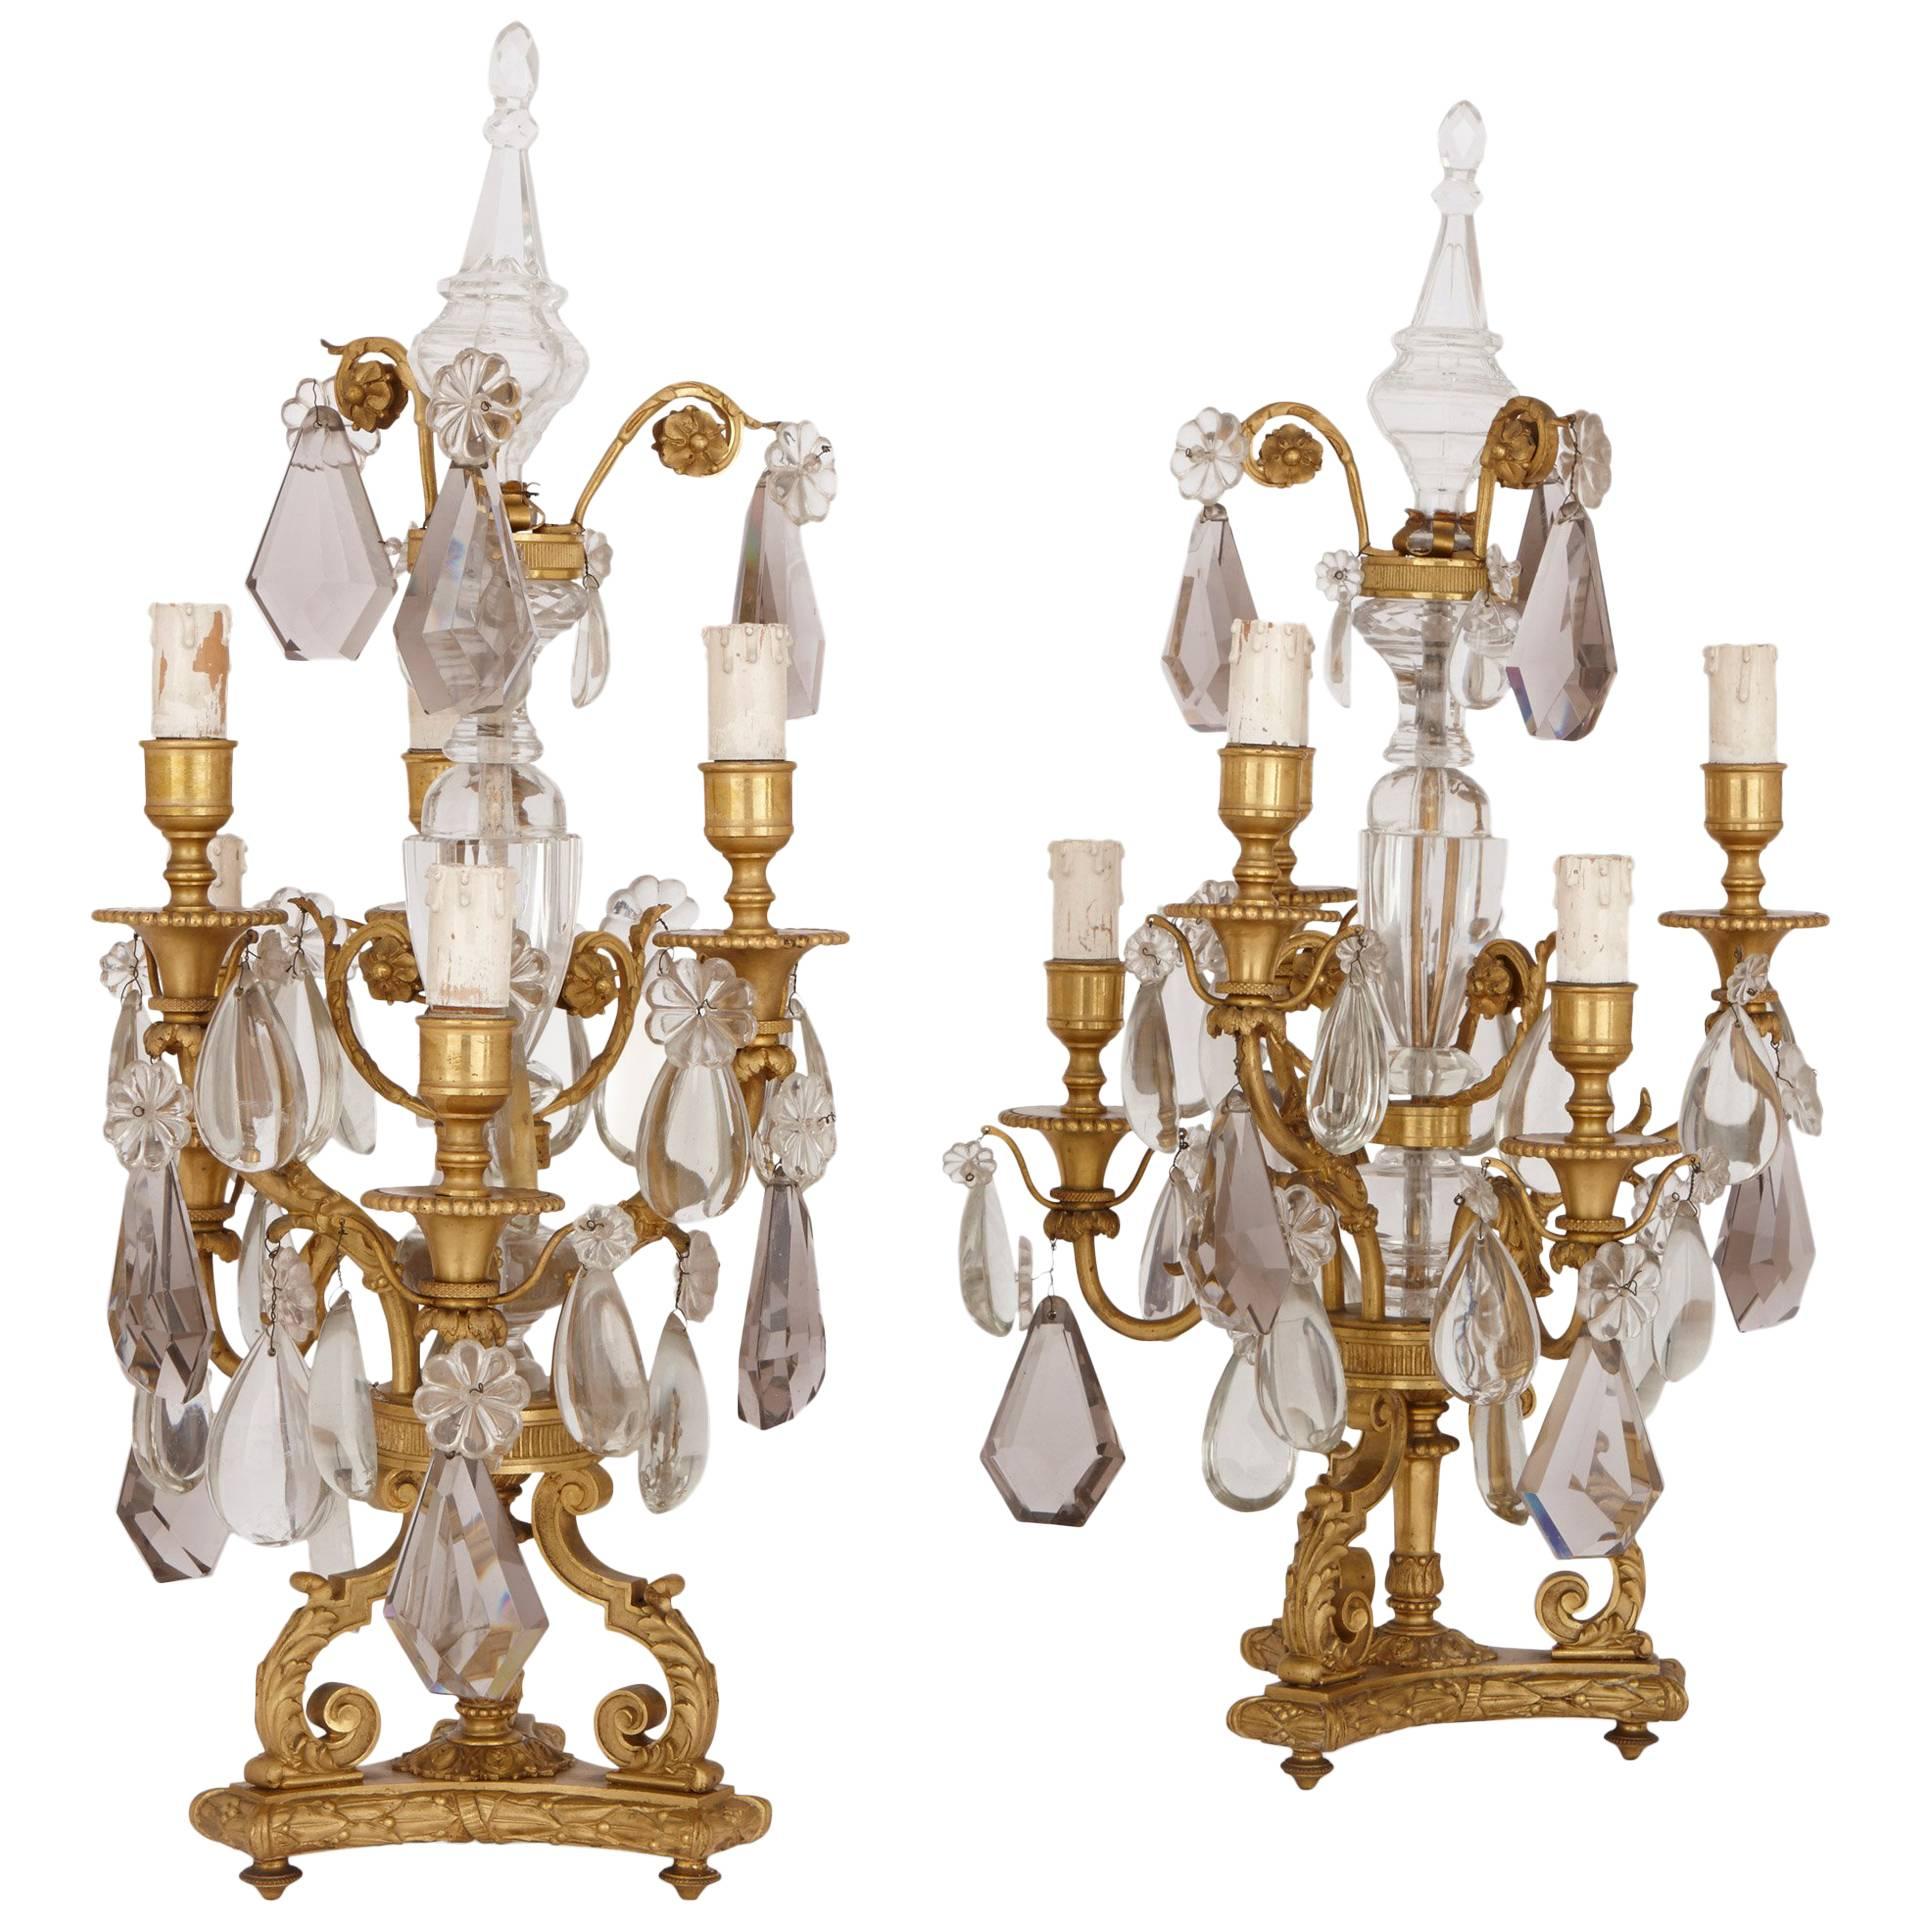 Pair of Antique 19th Century French Gilt Bronze and Crystal Candelabra